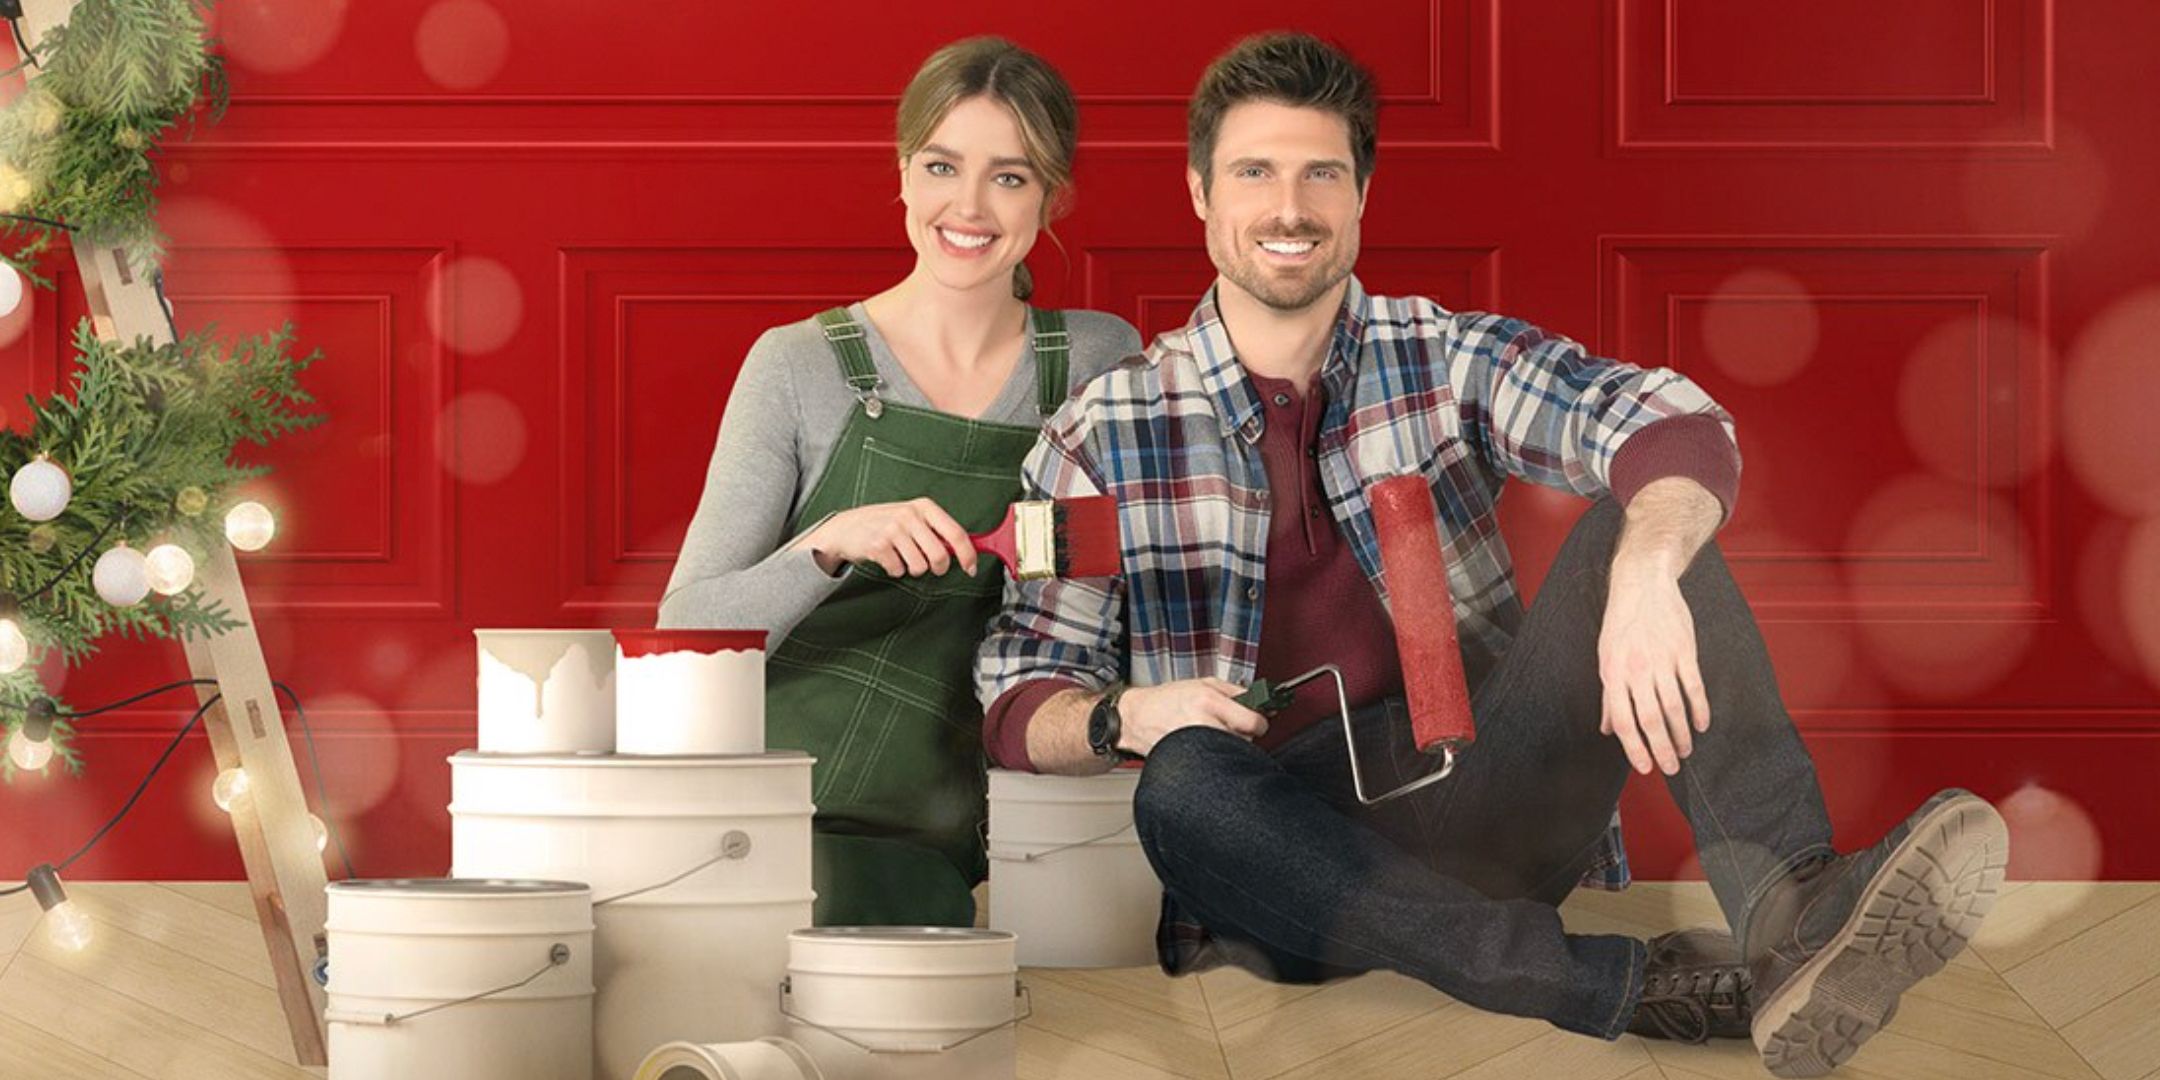 A woman and man sitting with paint cans and paint brushes in front of a red wall for Flipping Christmas